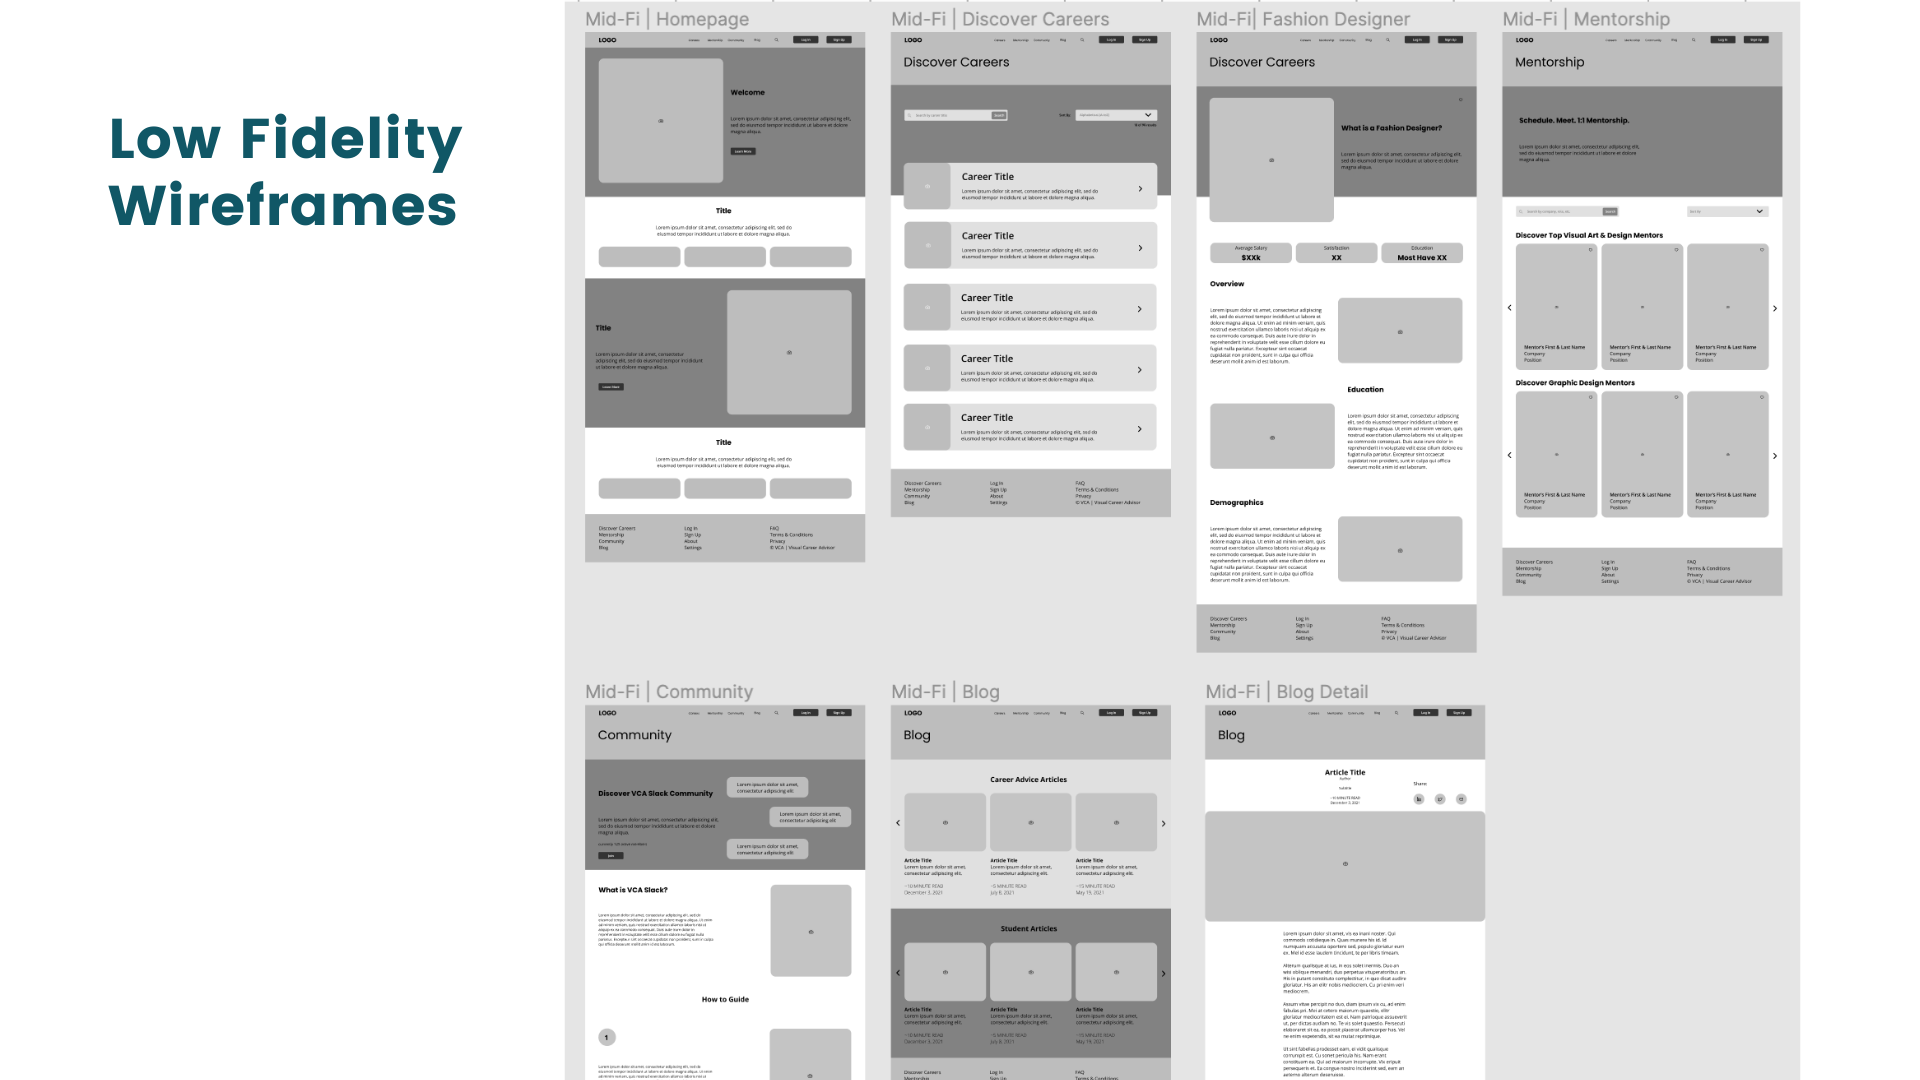 25Low-Mid FidelityWireframes.png